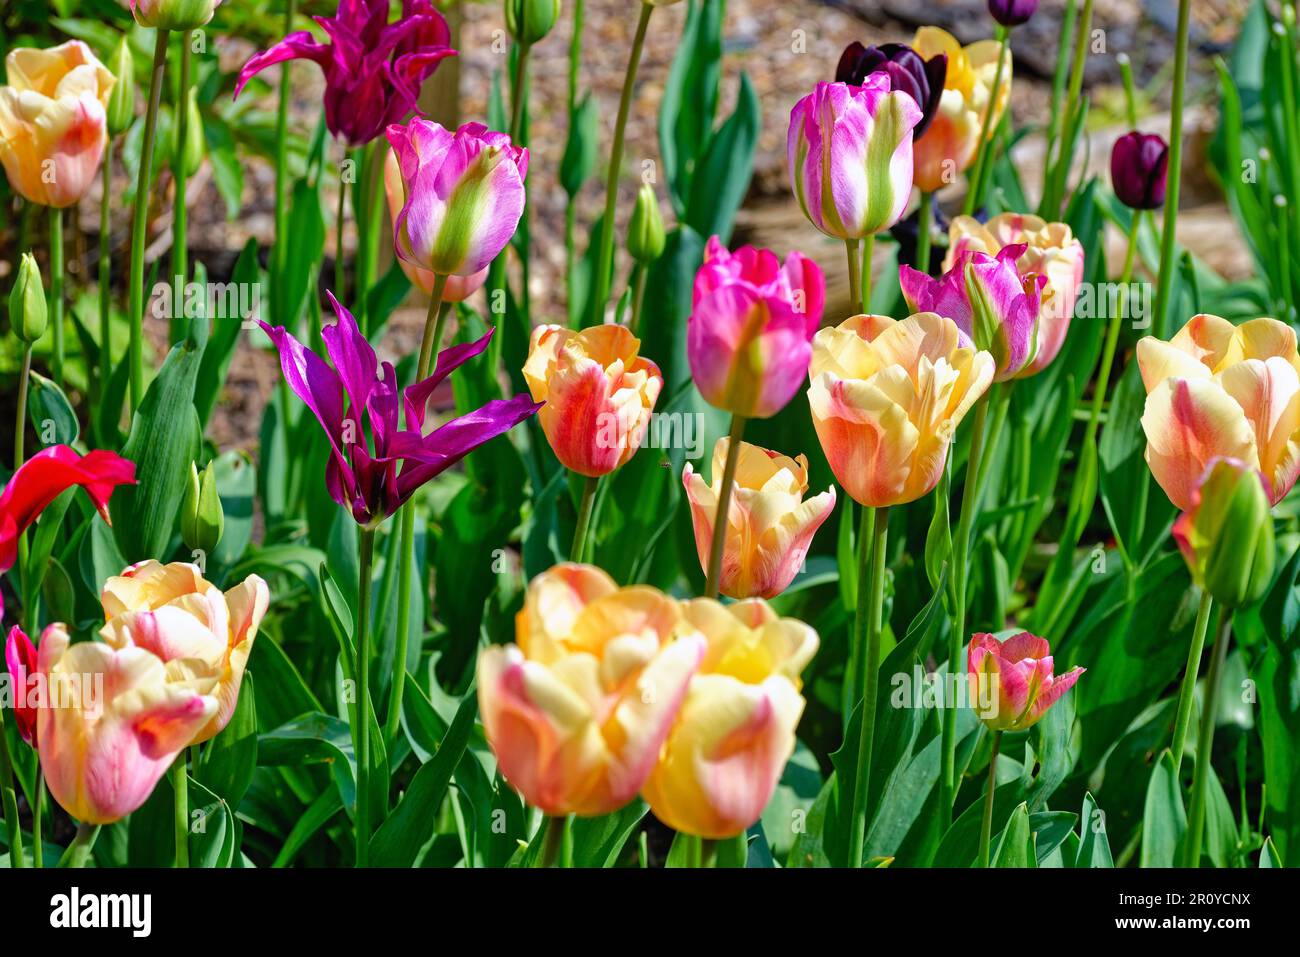 Close up of a mixed garden bed of flowering tulips Stock Photo